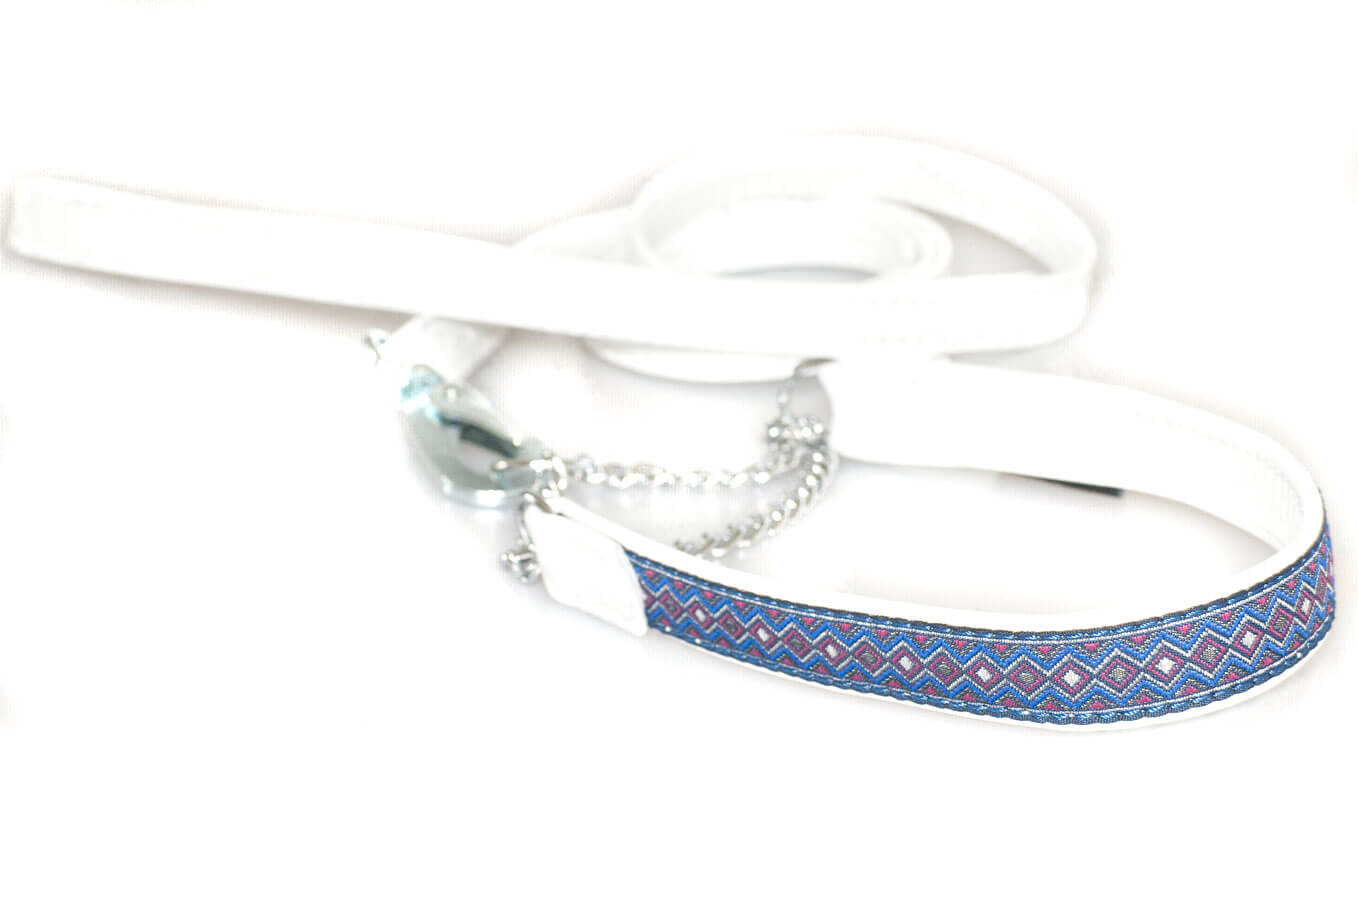 Double stitched white leather show set with ribbon martingale collar